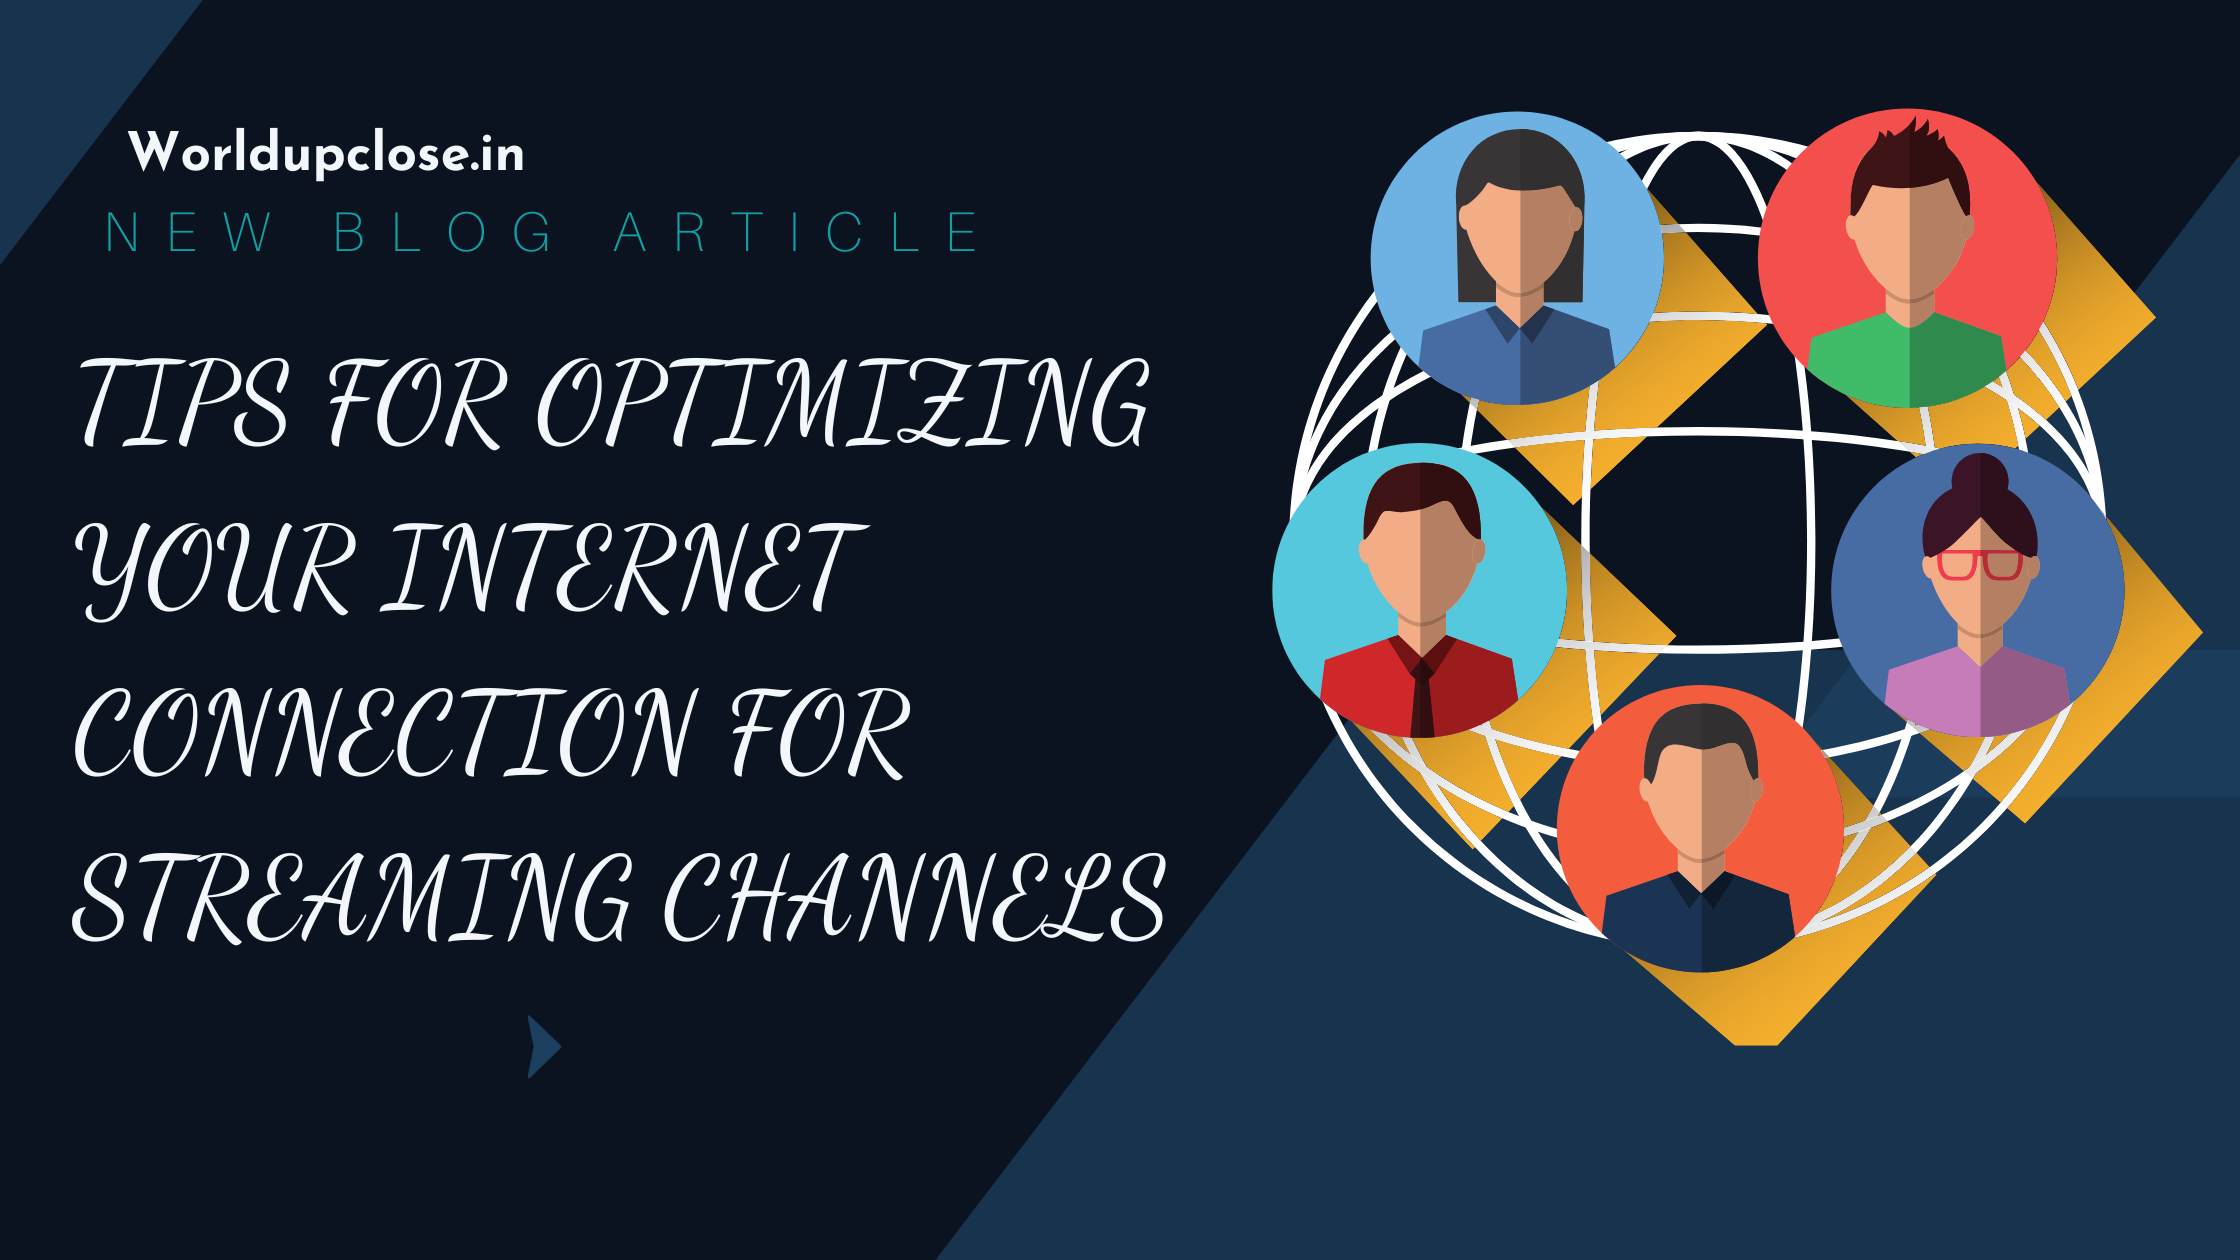 7 Tips for Optimizing Your Internet Connection for Streaming Channels 2